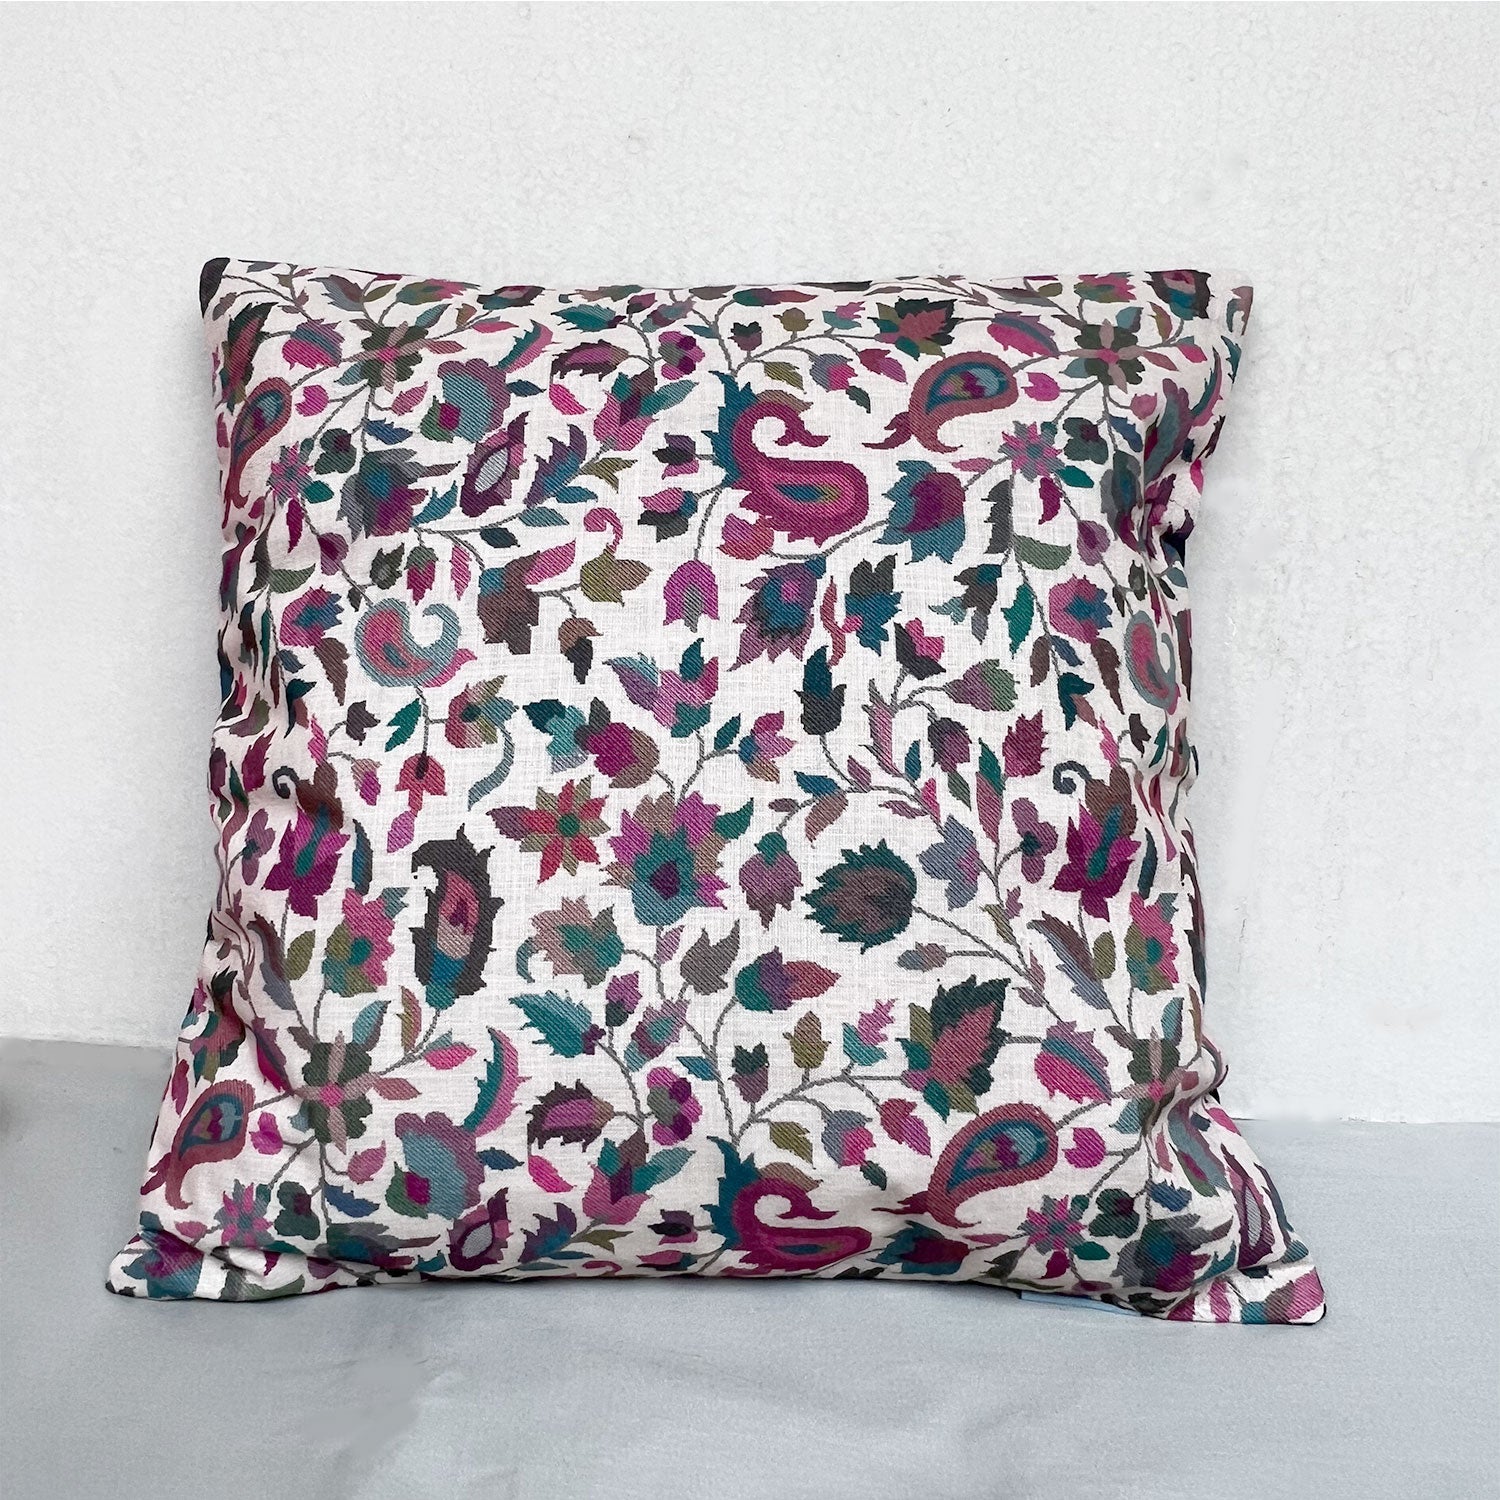 Floral Printed Pink Pure Cotton Cushion Cover - 16 x 16 inches